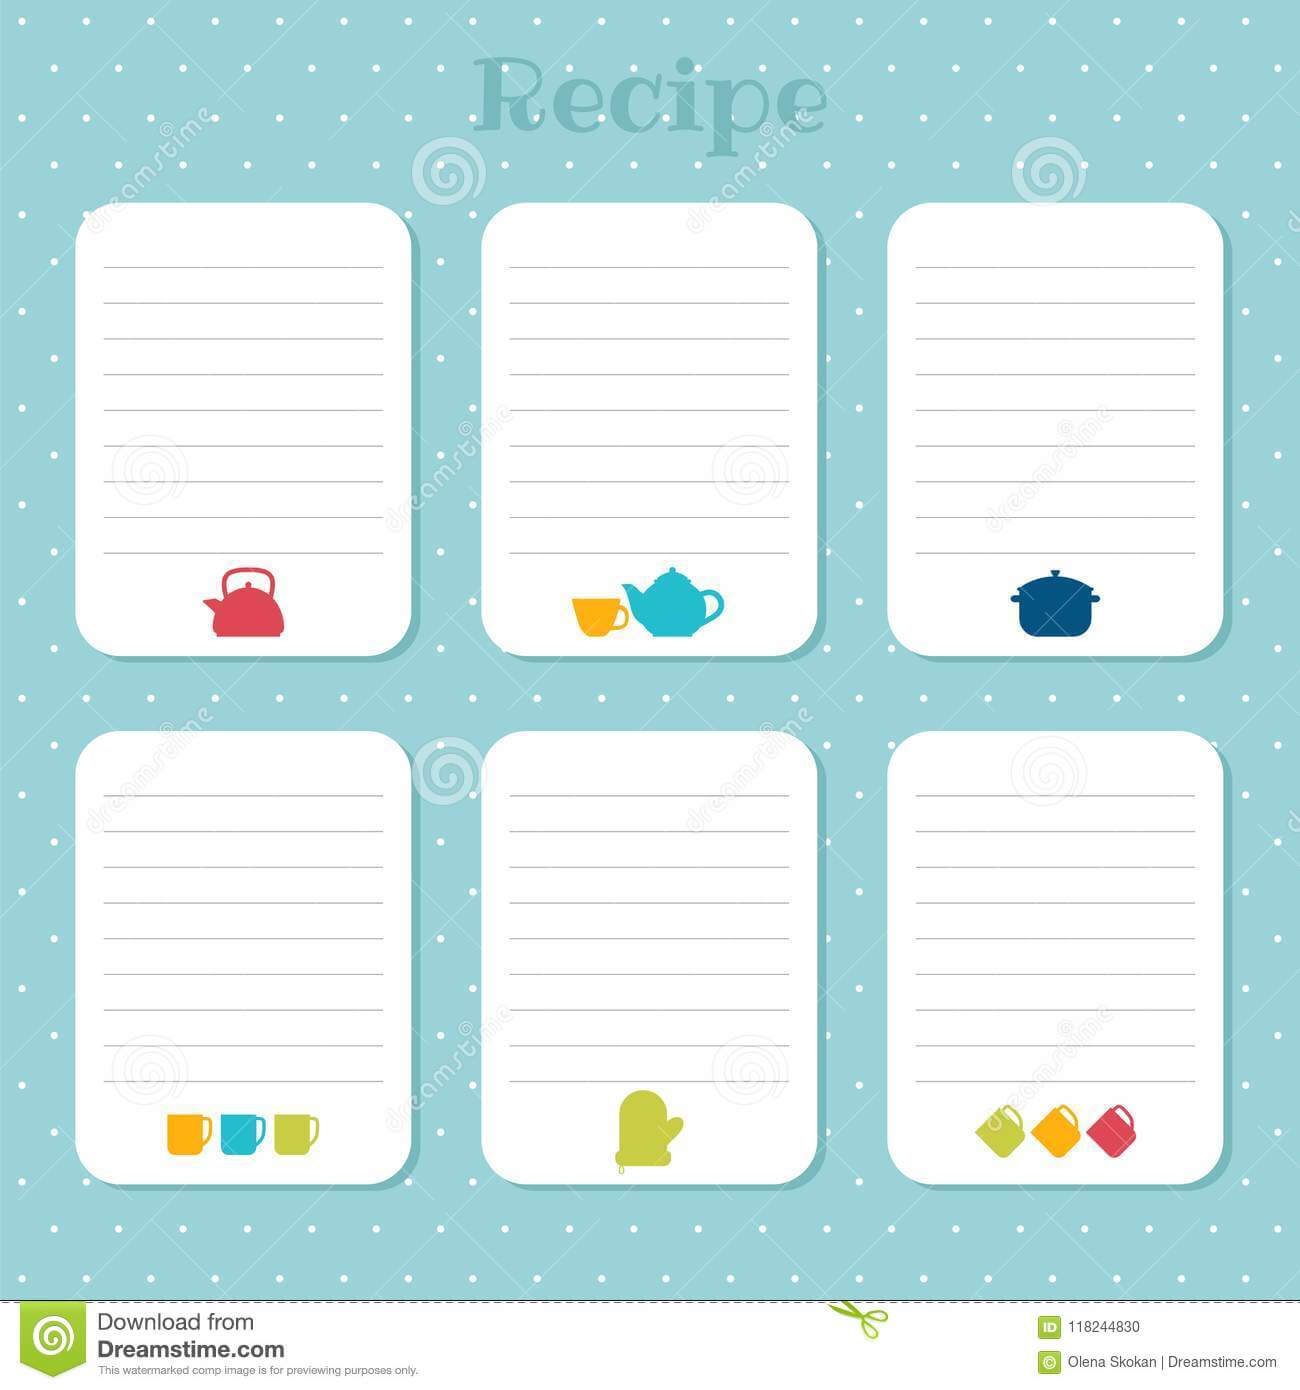 Recipe Cards Set. Cooking Card Templates. For Restaurant Regarding Restaurant Recipe Card Template